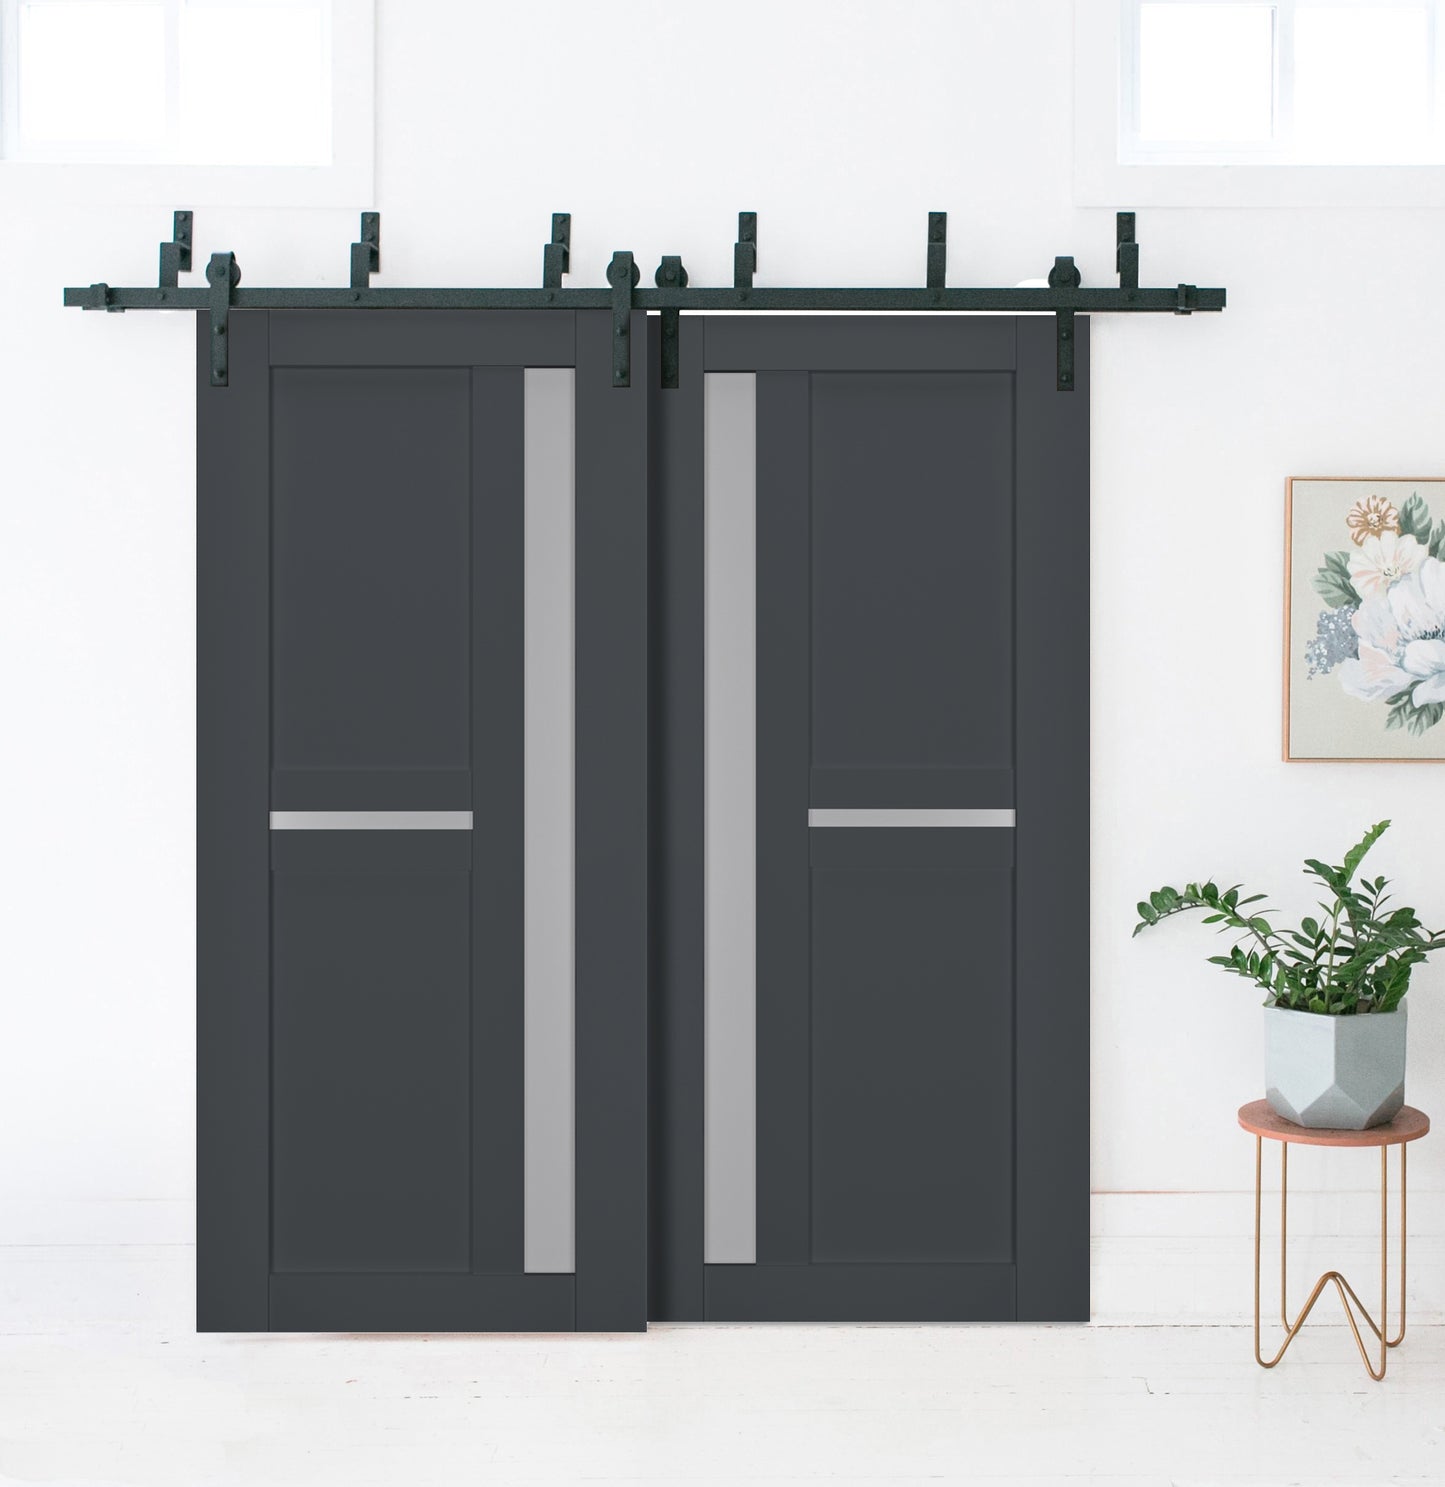 Veregio 7288 Antracite Double Barn Door with Frosted Glass and Black Bypass Rail